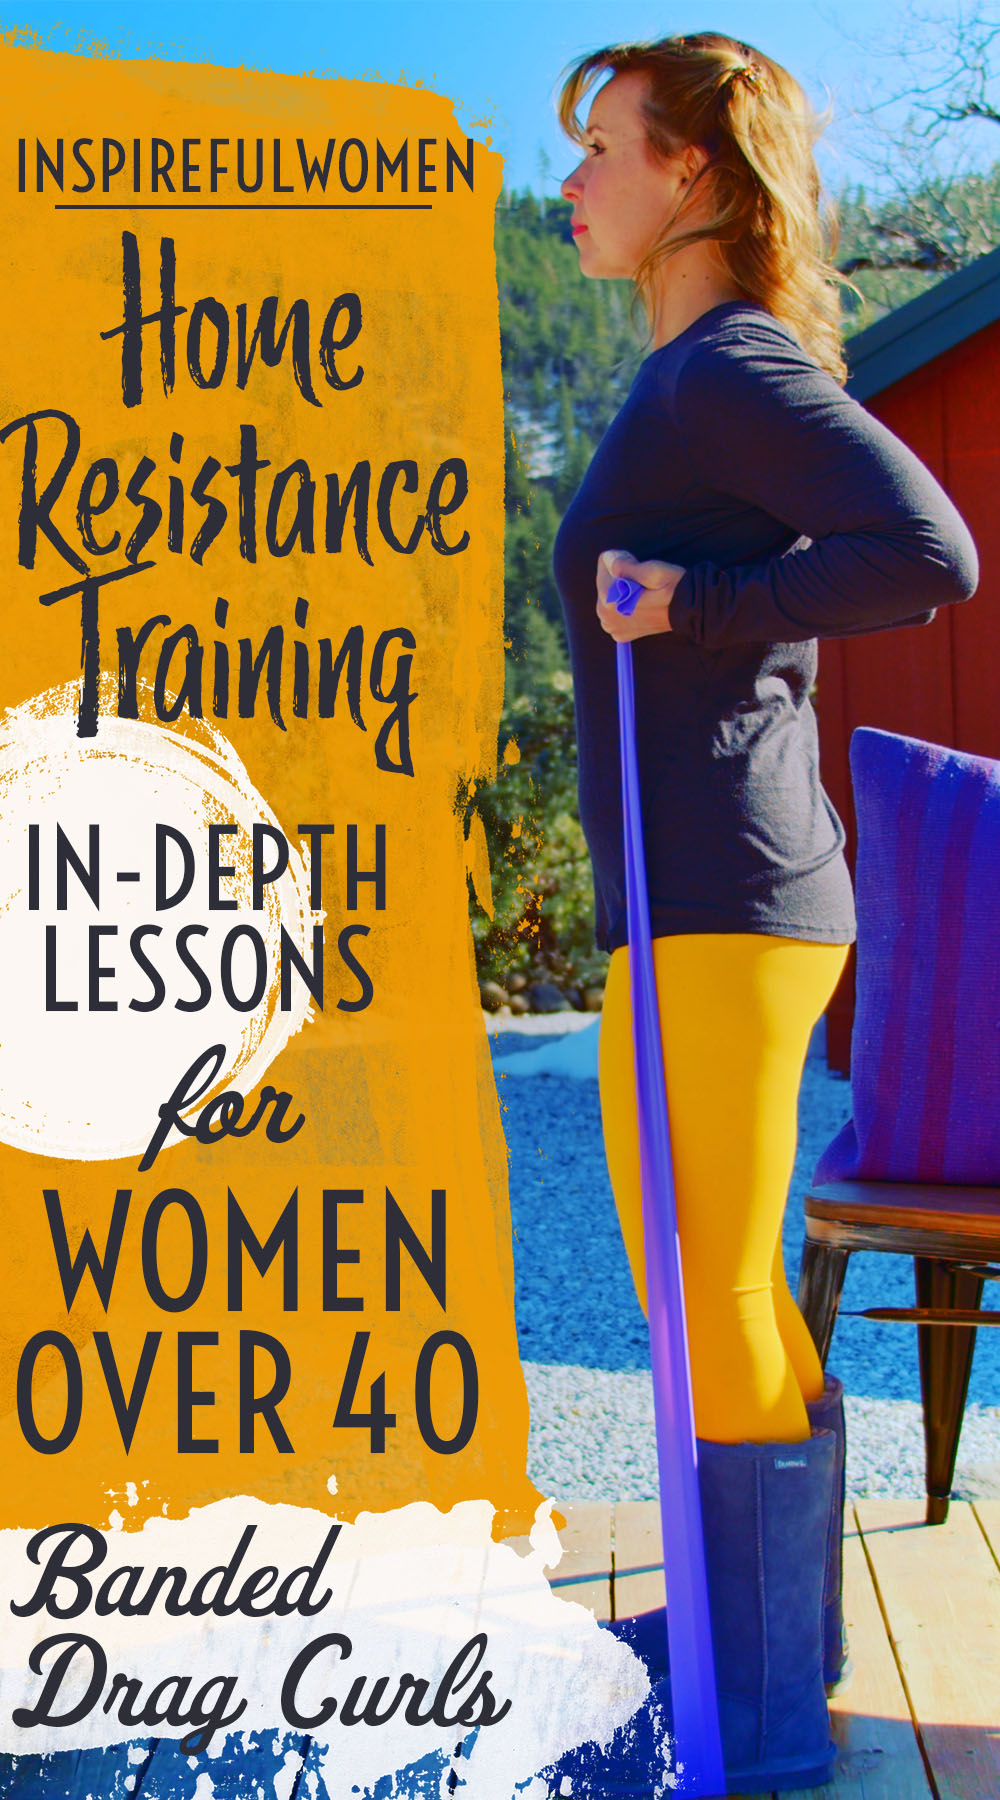 resistance-band-bicep-drag-curls-home-lessons-for-women-40-plus